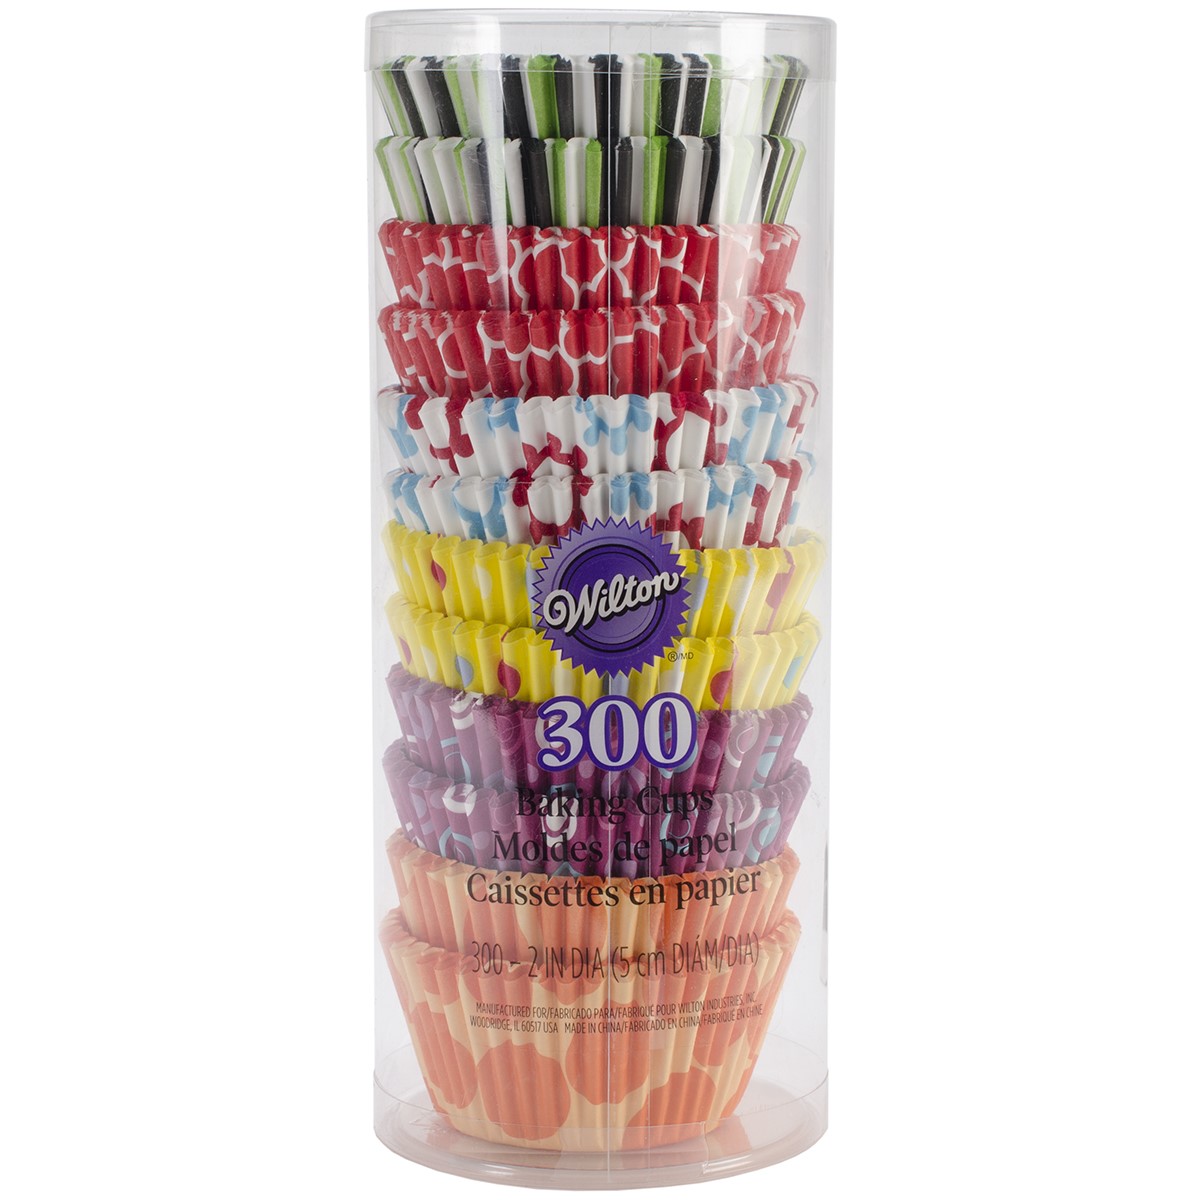 Wilton Cupcake Liner Party Pack, 300 Ct - image 1 of 2